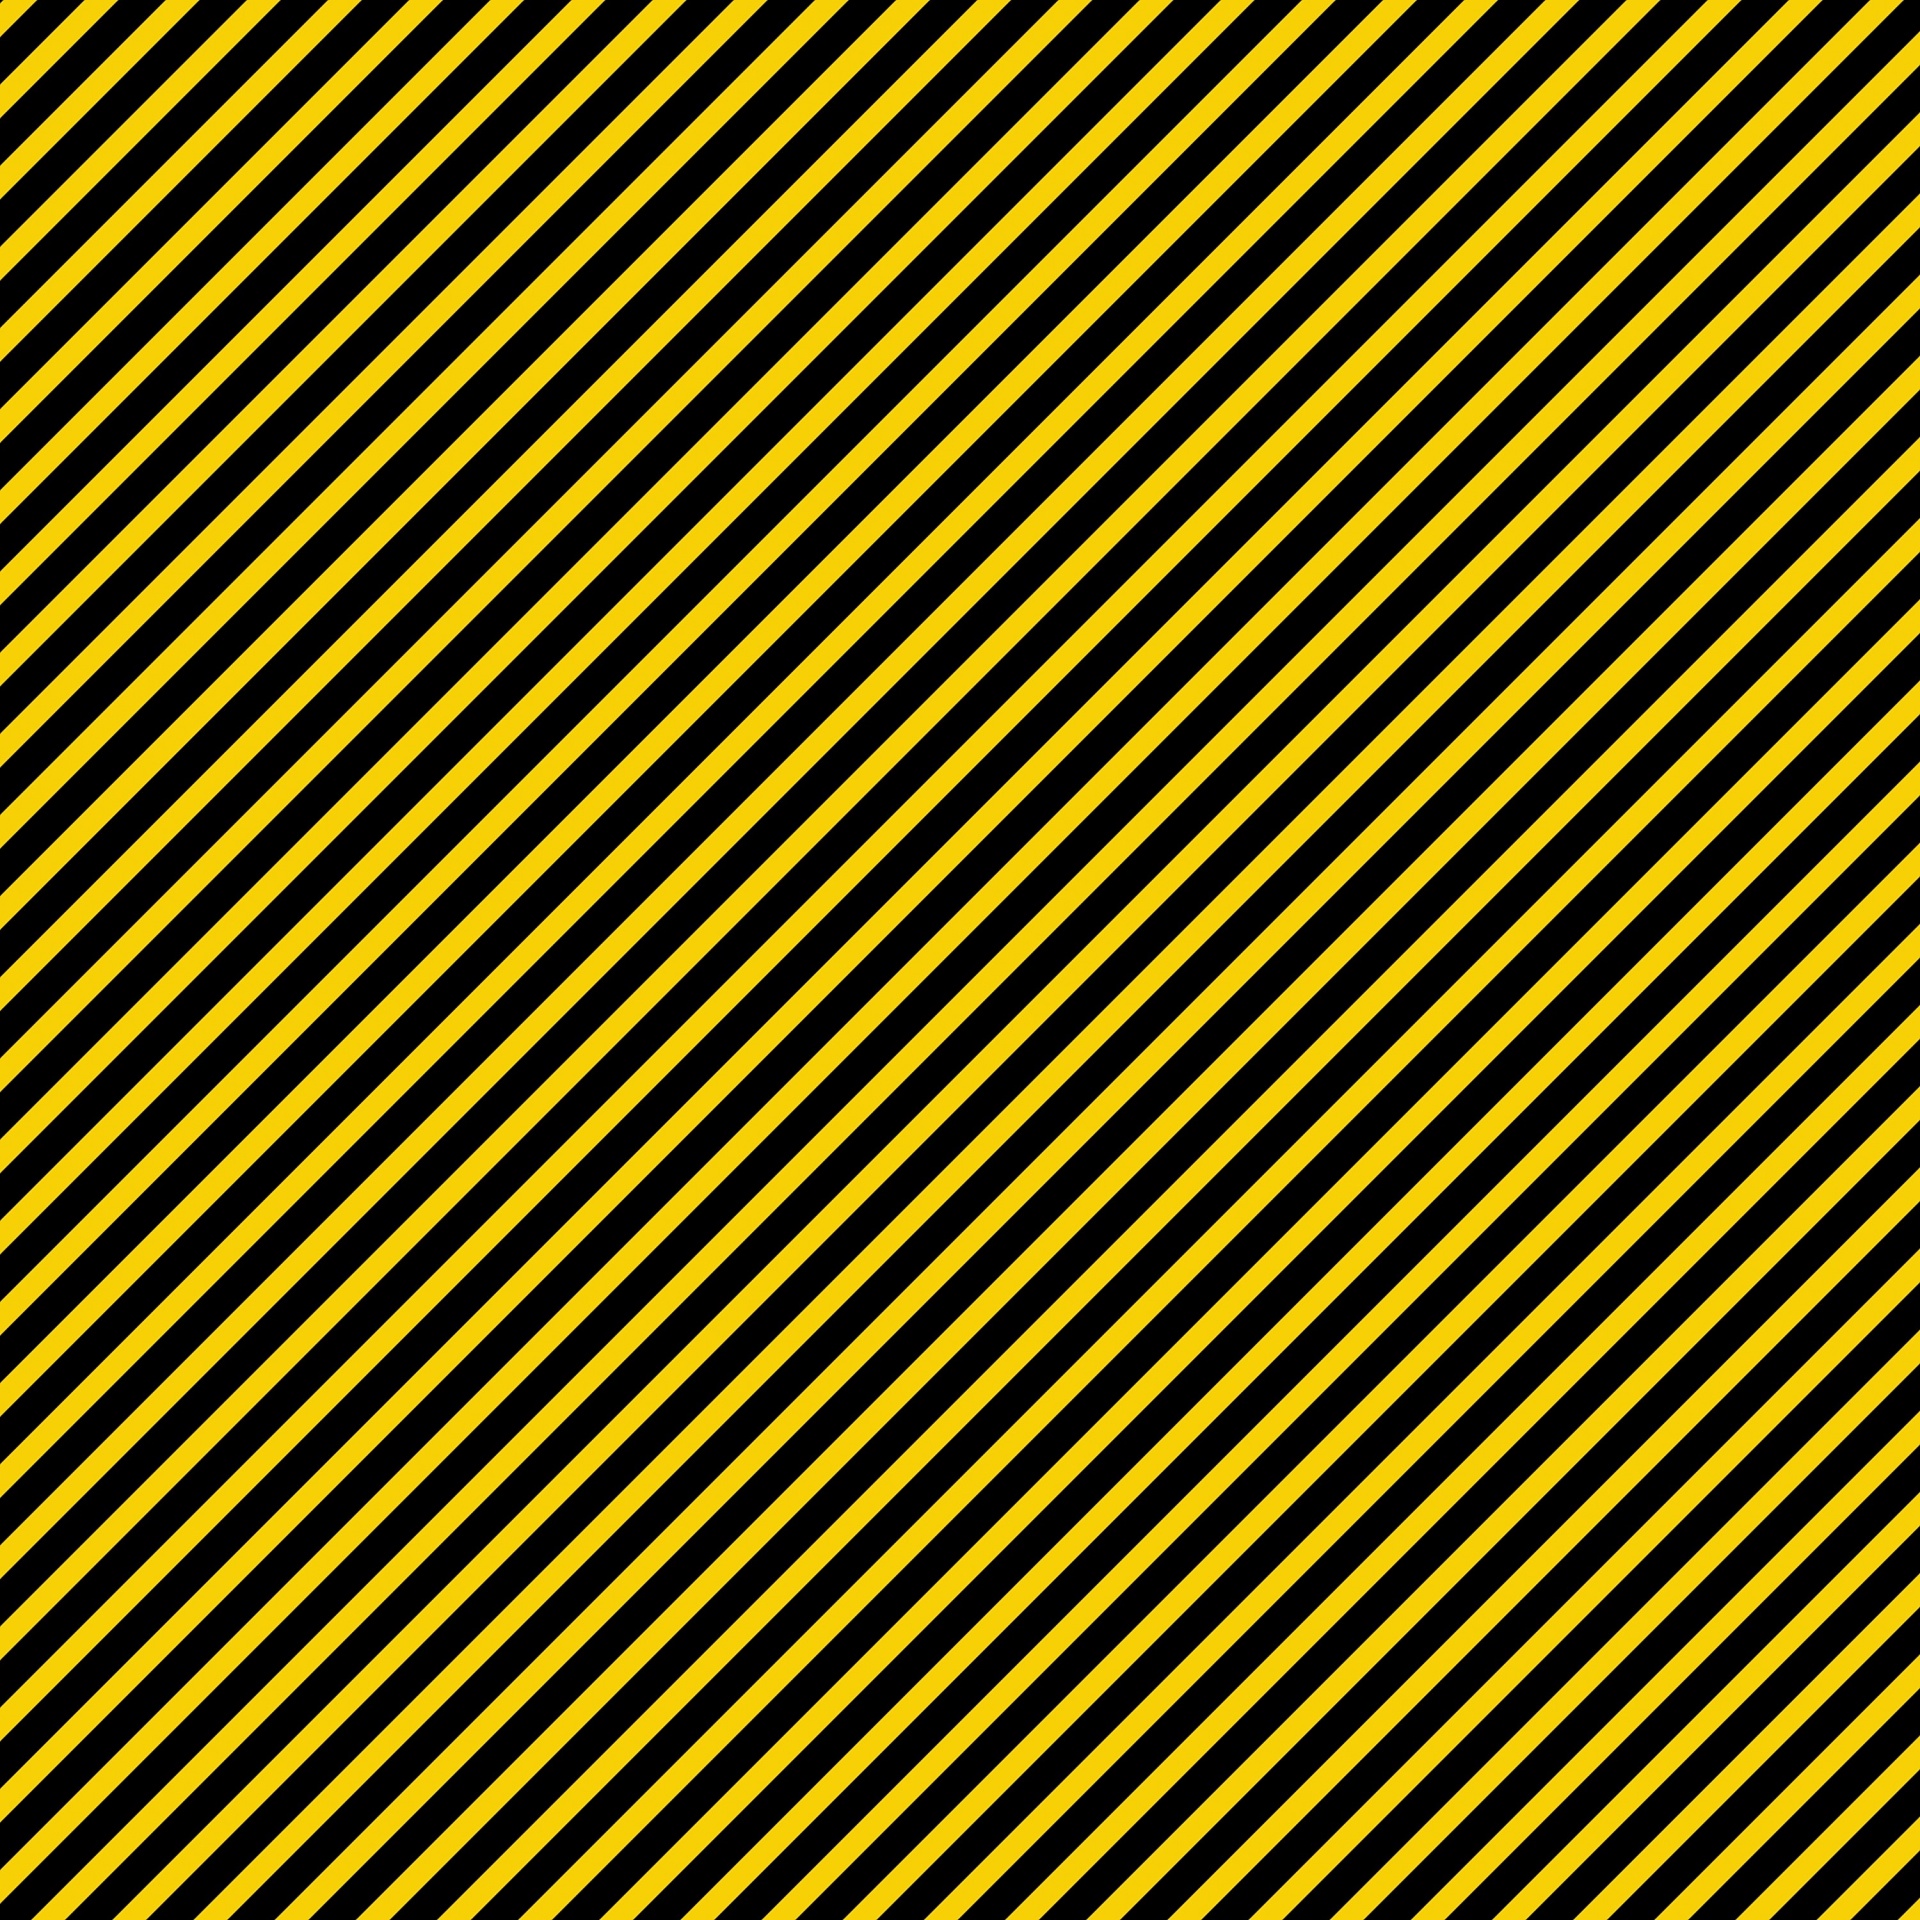 Digital design paper with black and yellow oblique stripes